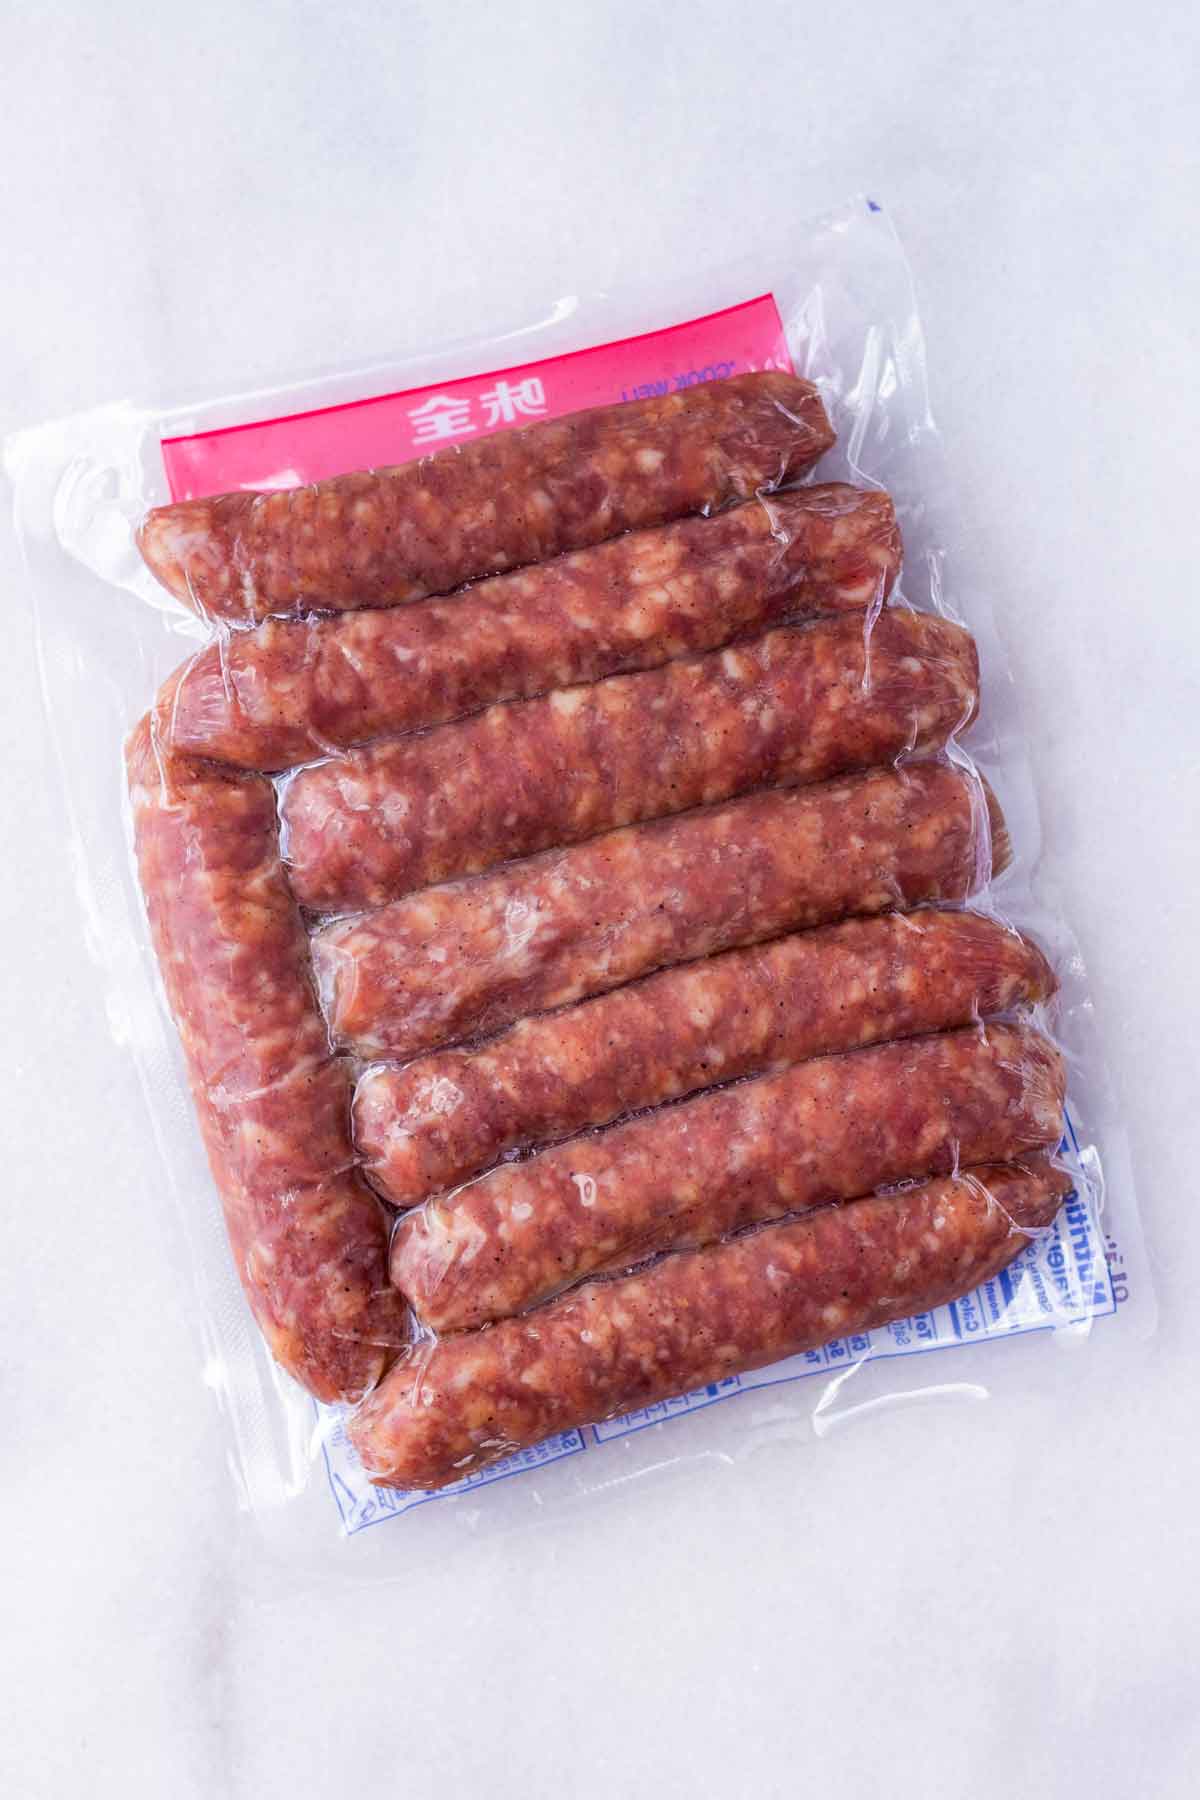 packaged lap cheong or Chinese sweet sausage